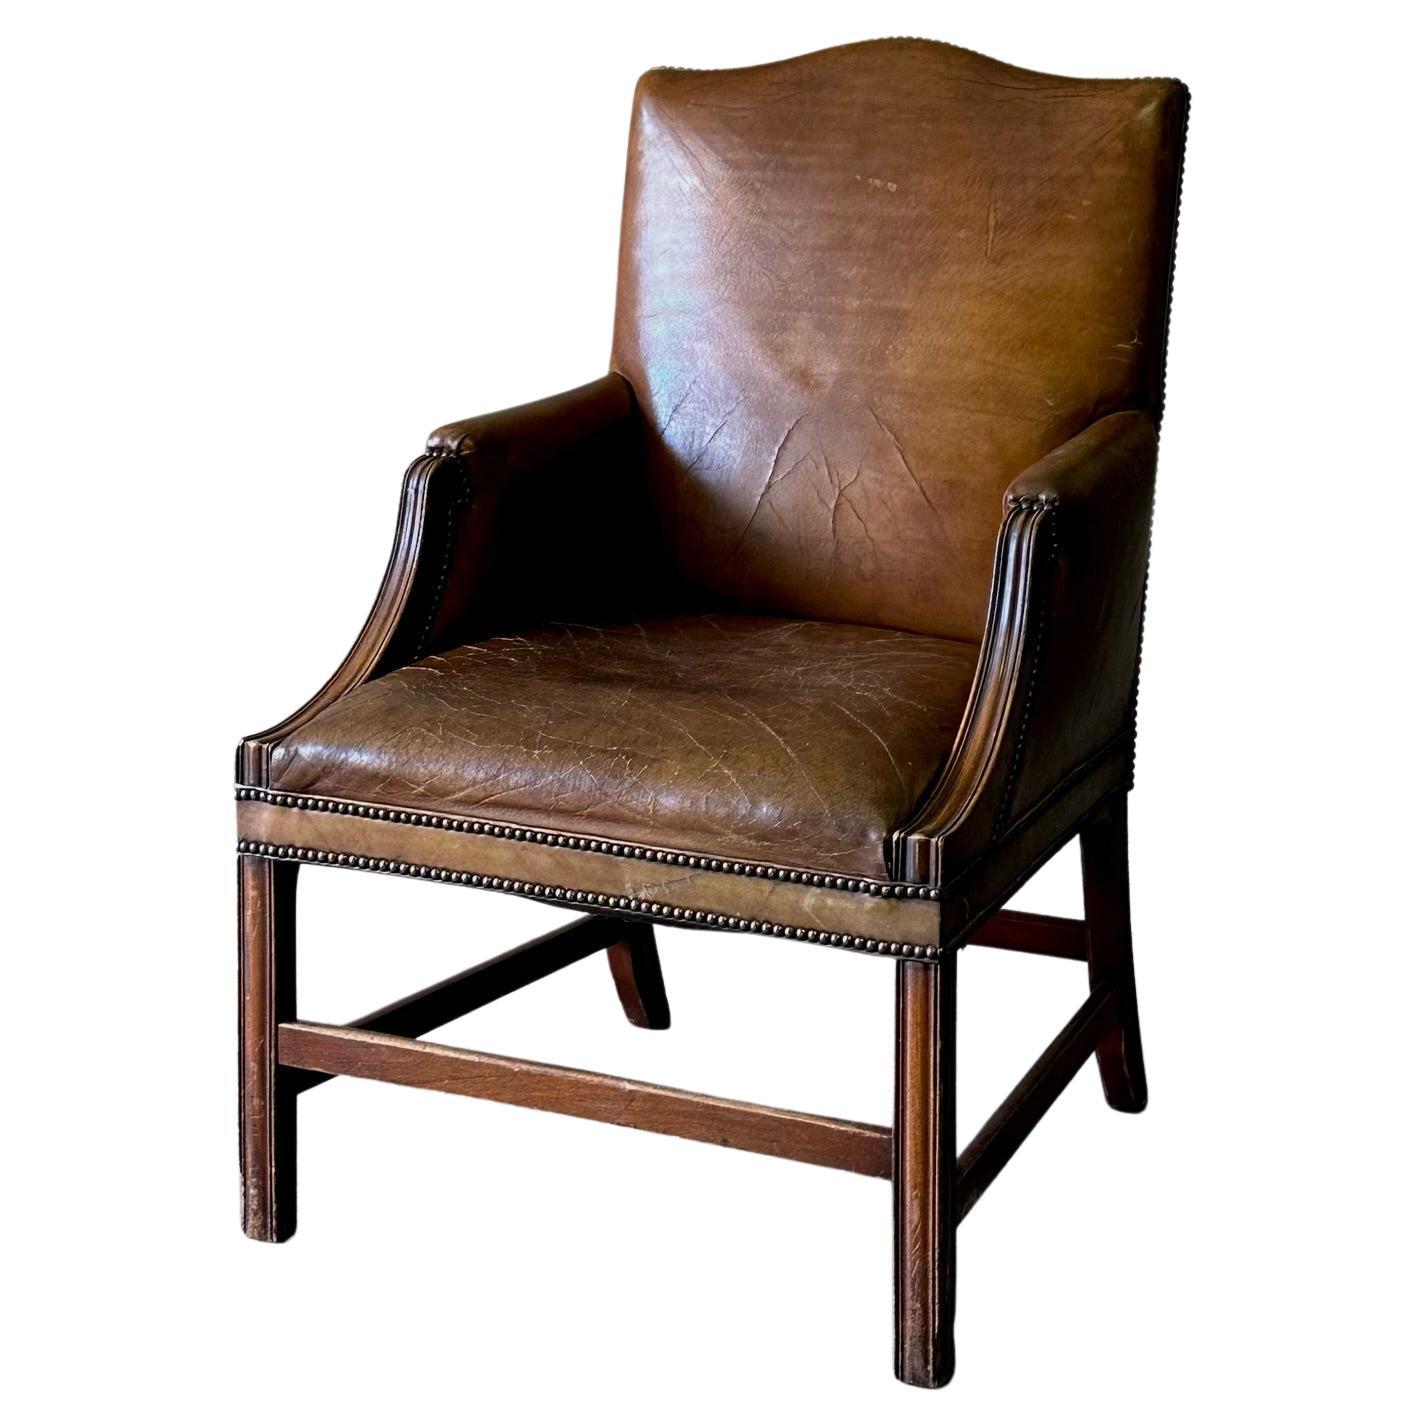 19th Century Belgian Leather Arm Chair